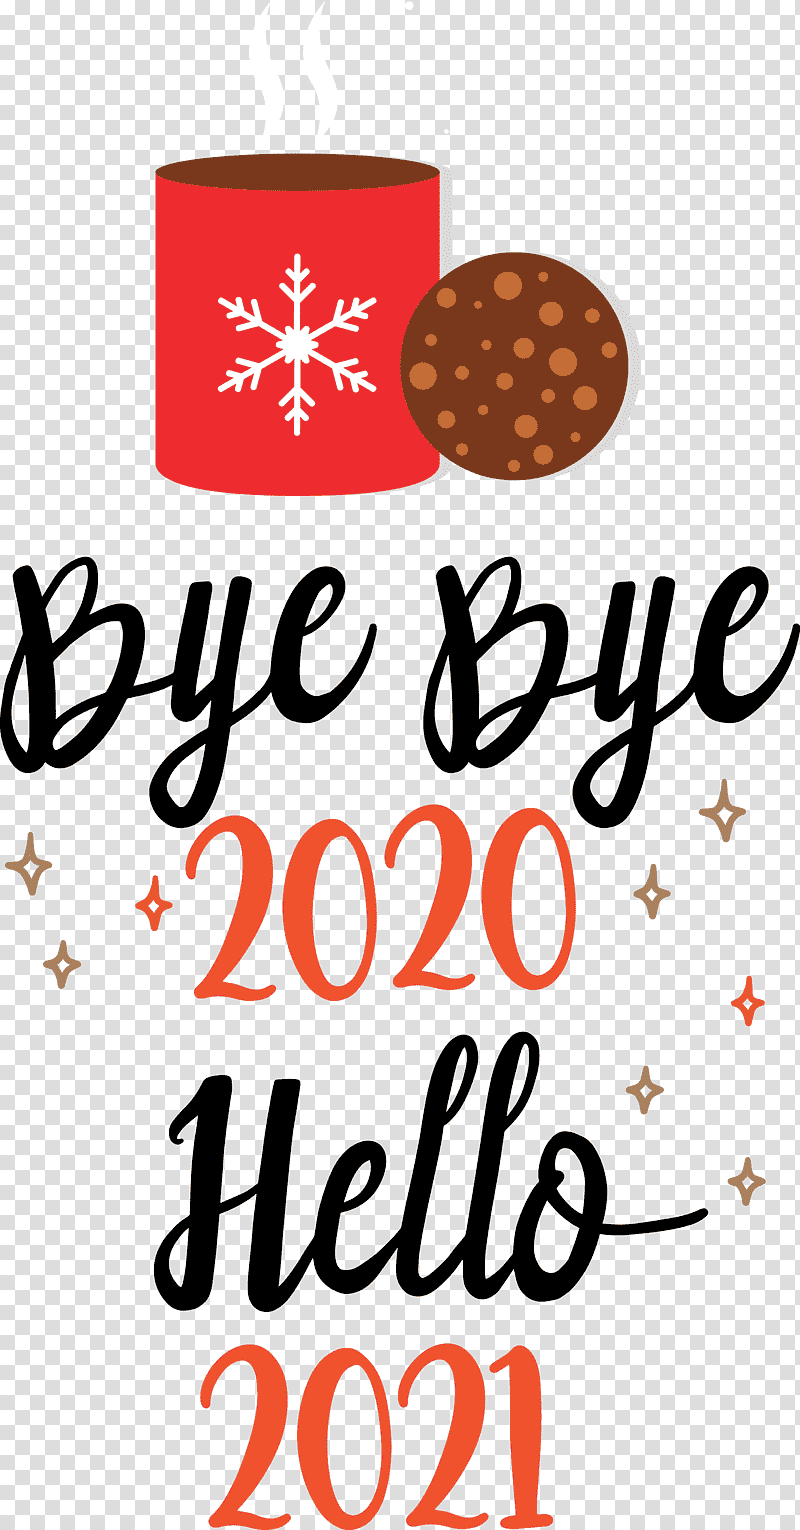 Hello 2021 Year Bye bye 2020 Year, Logo, Meter, Line, Geometry, Mathematics transparent background PNG clipart